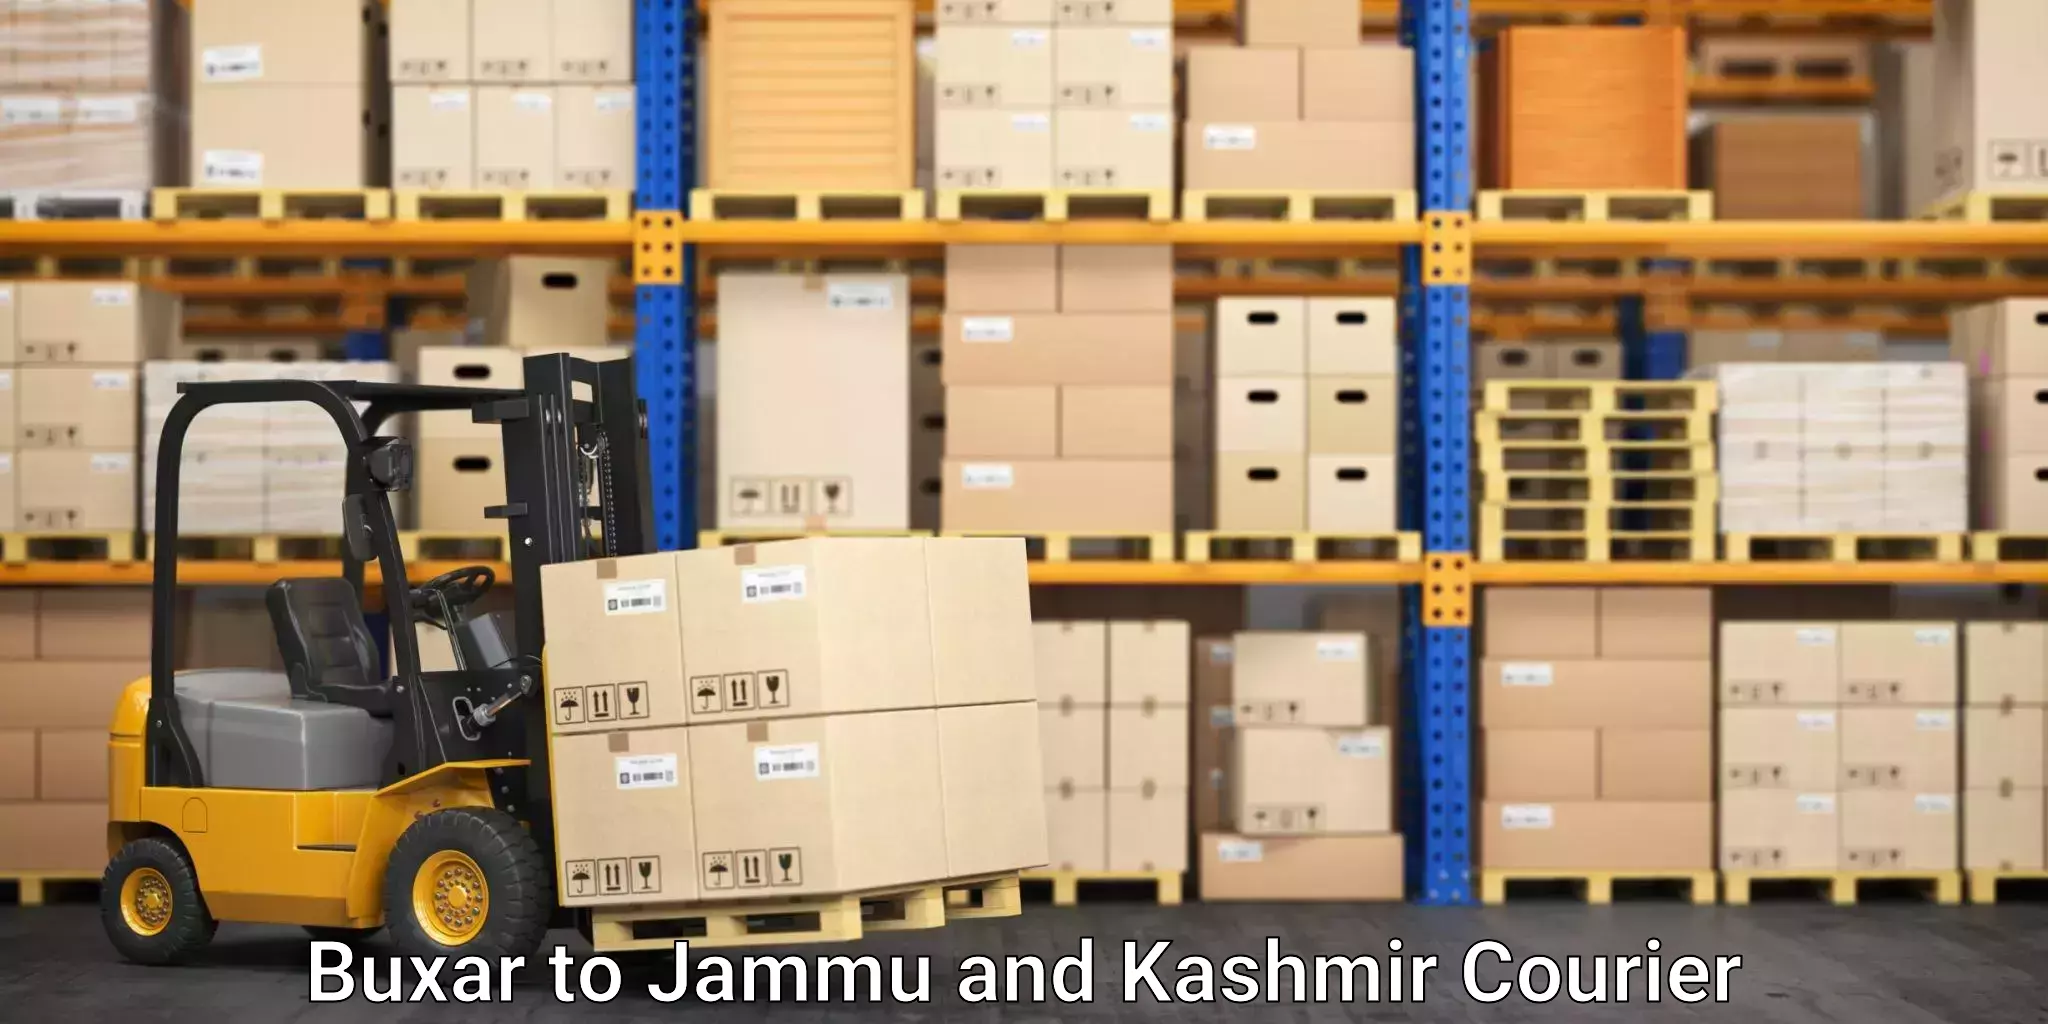 Advanced relocation solutions Buxar to Jammu and Kashmir